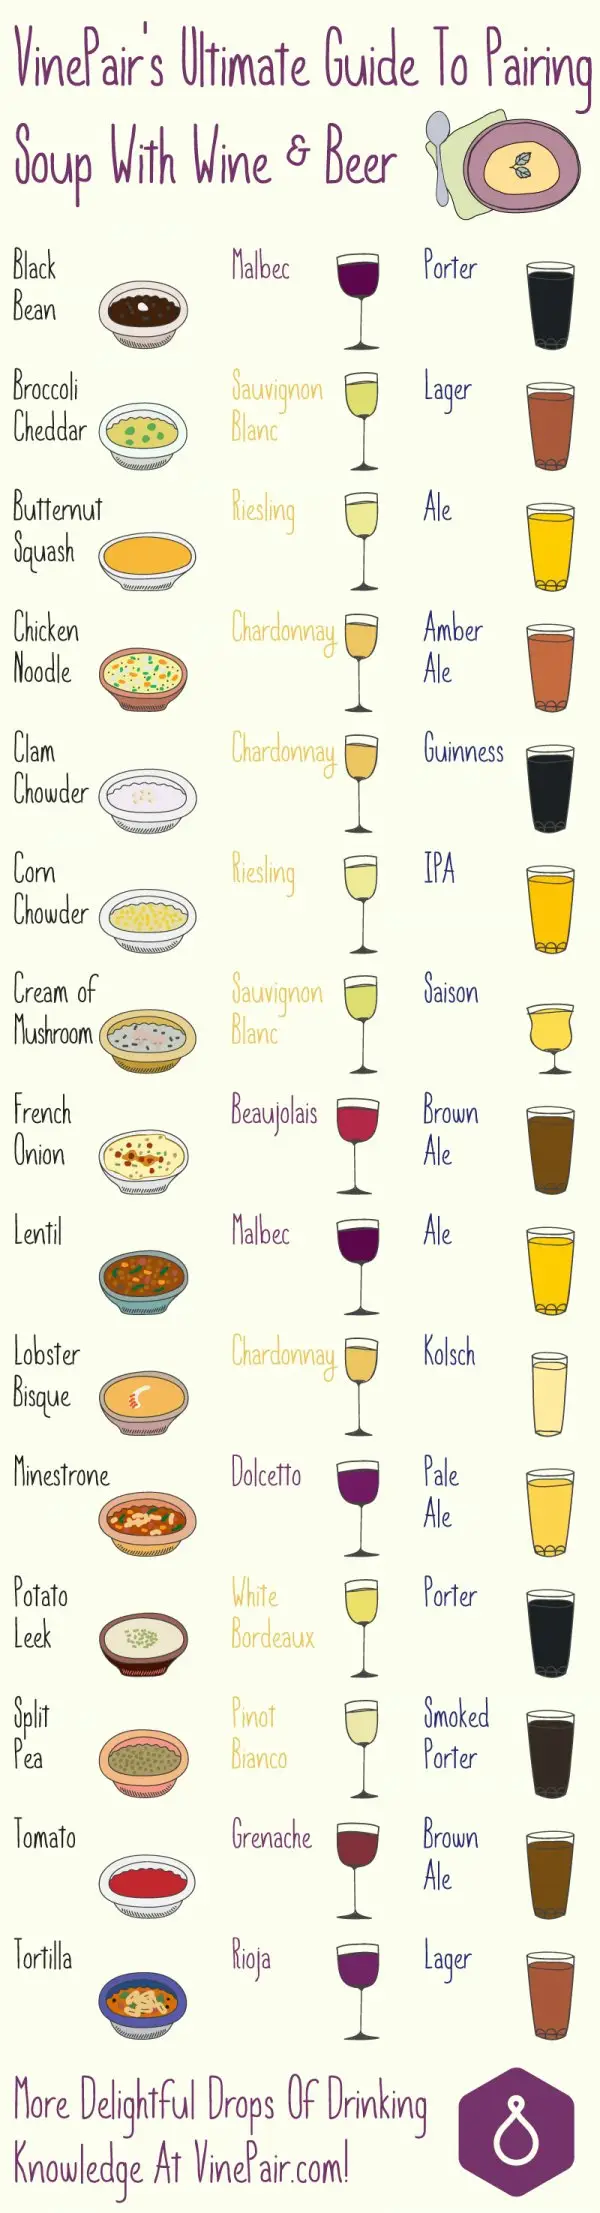 Wine or Beer, and Soup!